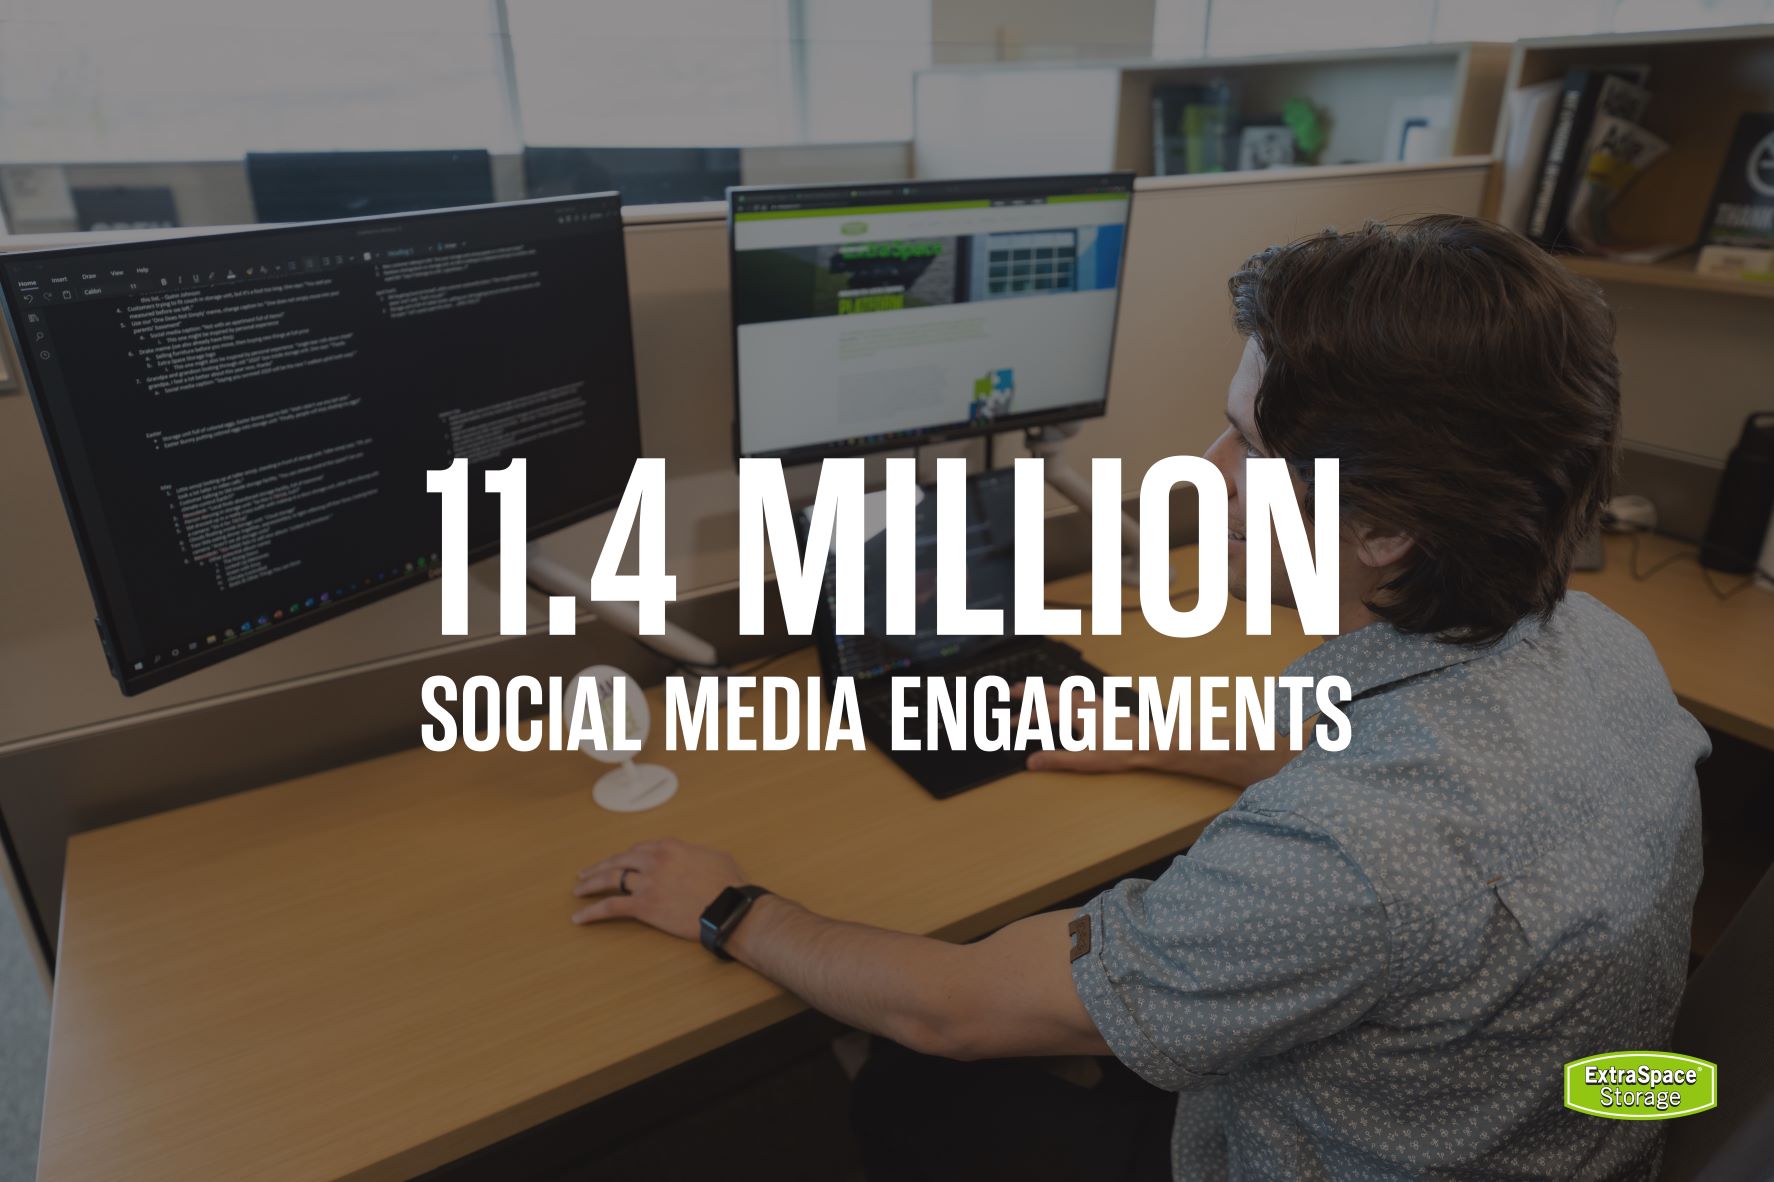 11.4 million social media engagements - Extra Space Storage 2021